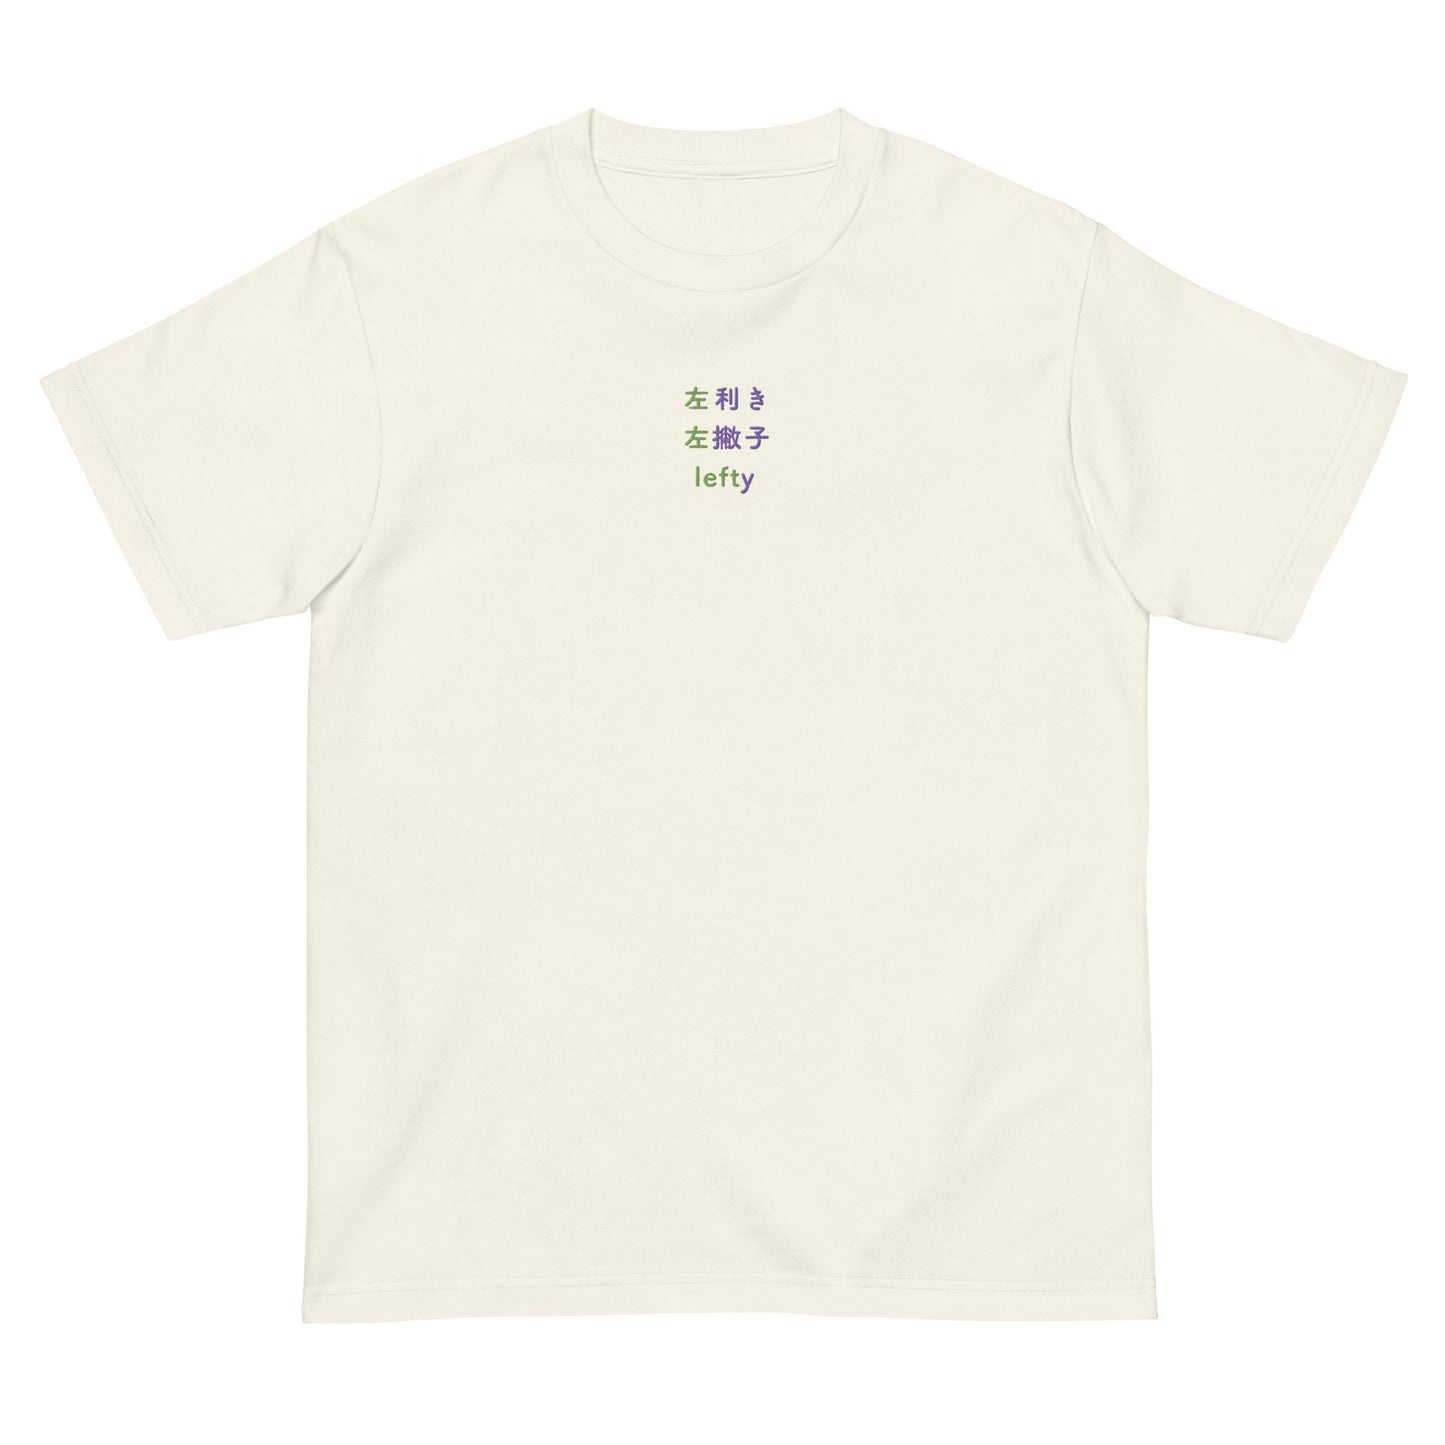 Ivory High Quality Tee - Front Design with an Green, Purple Embroidery "Lefty" in Japanese,Chinese and English